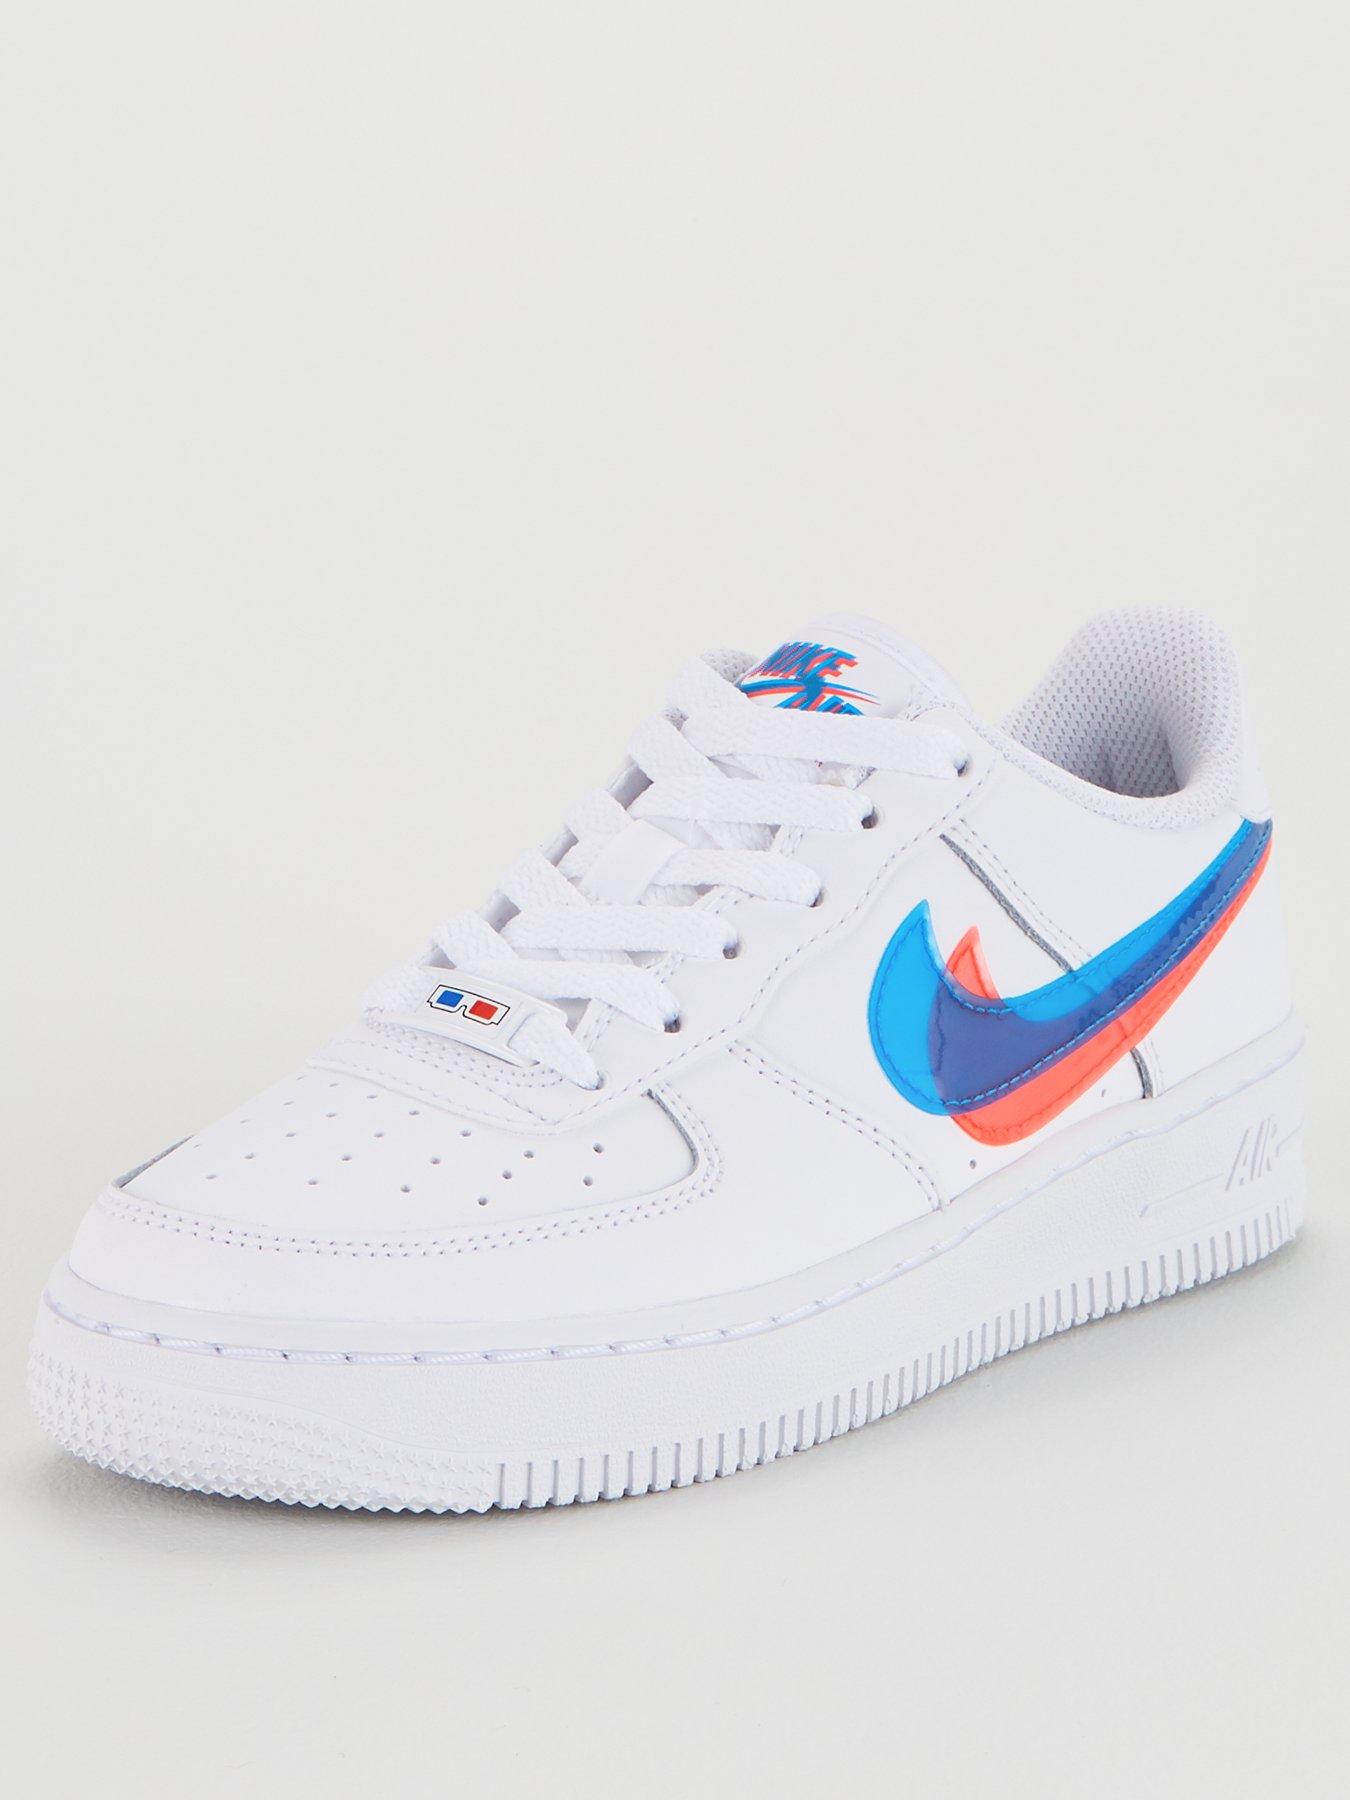 air force 1 red and blue tick